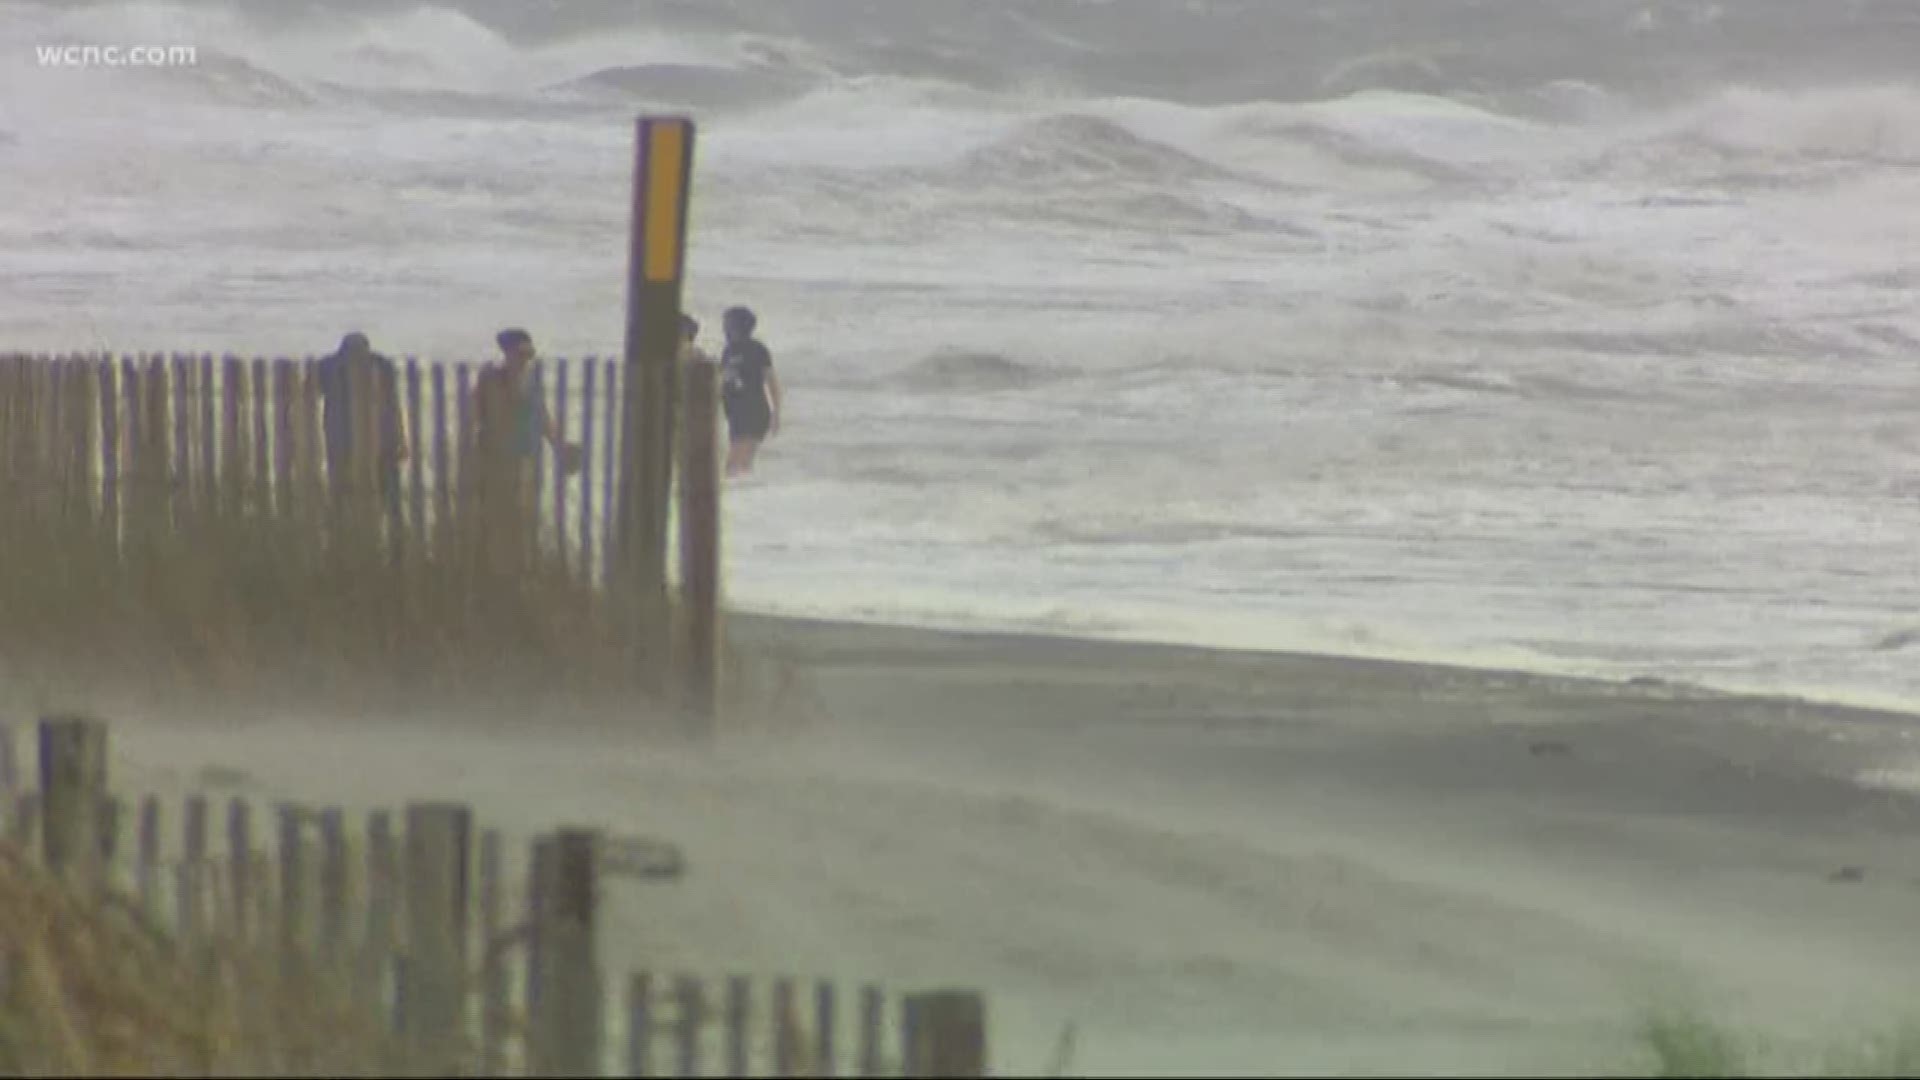 Conditions were less than ideal for folks visiting Myrtle Beach during Tropical Storm Michael.